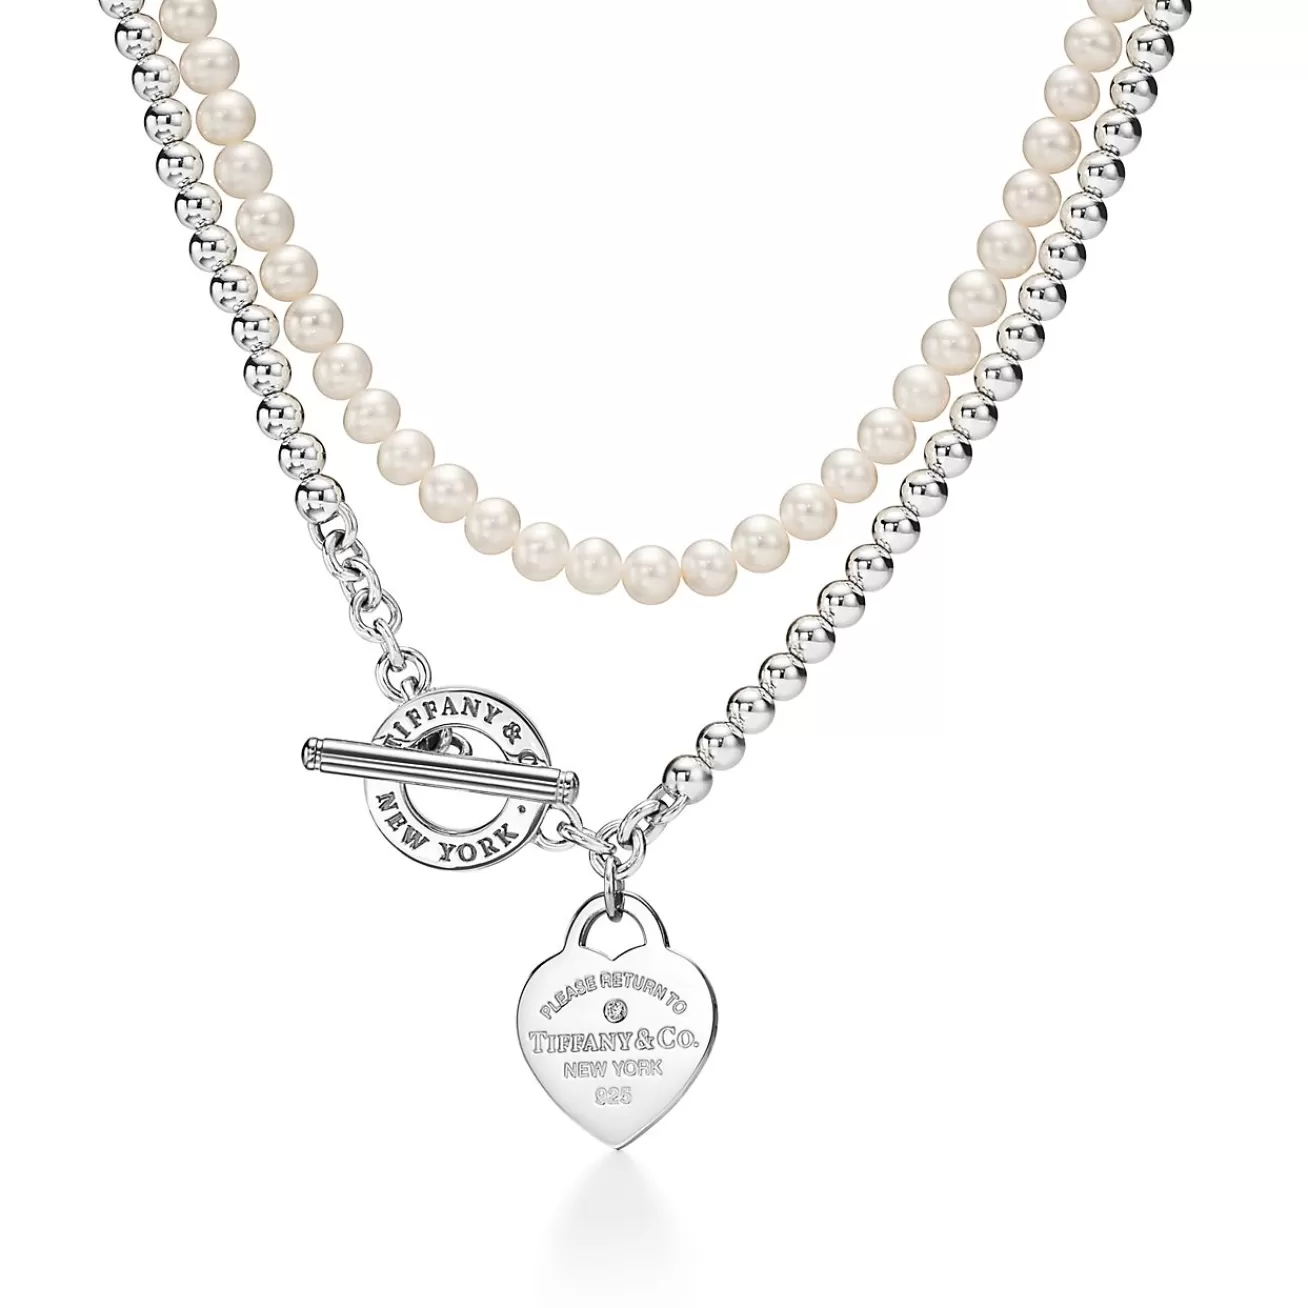 Tiffany & Co. Return to Tiffany® Wrap Necklace in Silver with Pearls and a Diamond, Small | ^ Necklaces & Pendants | Gifts for Her